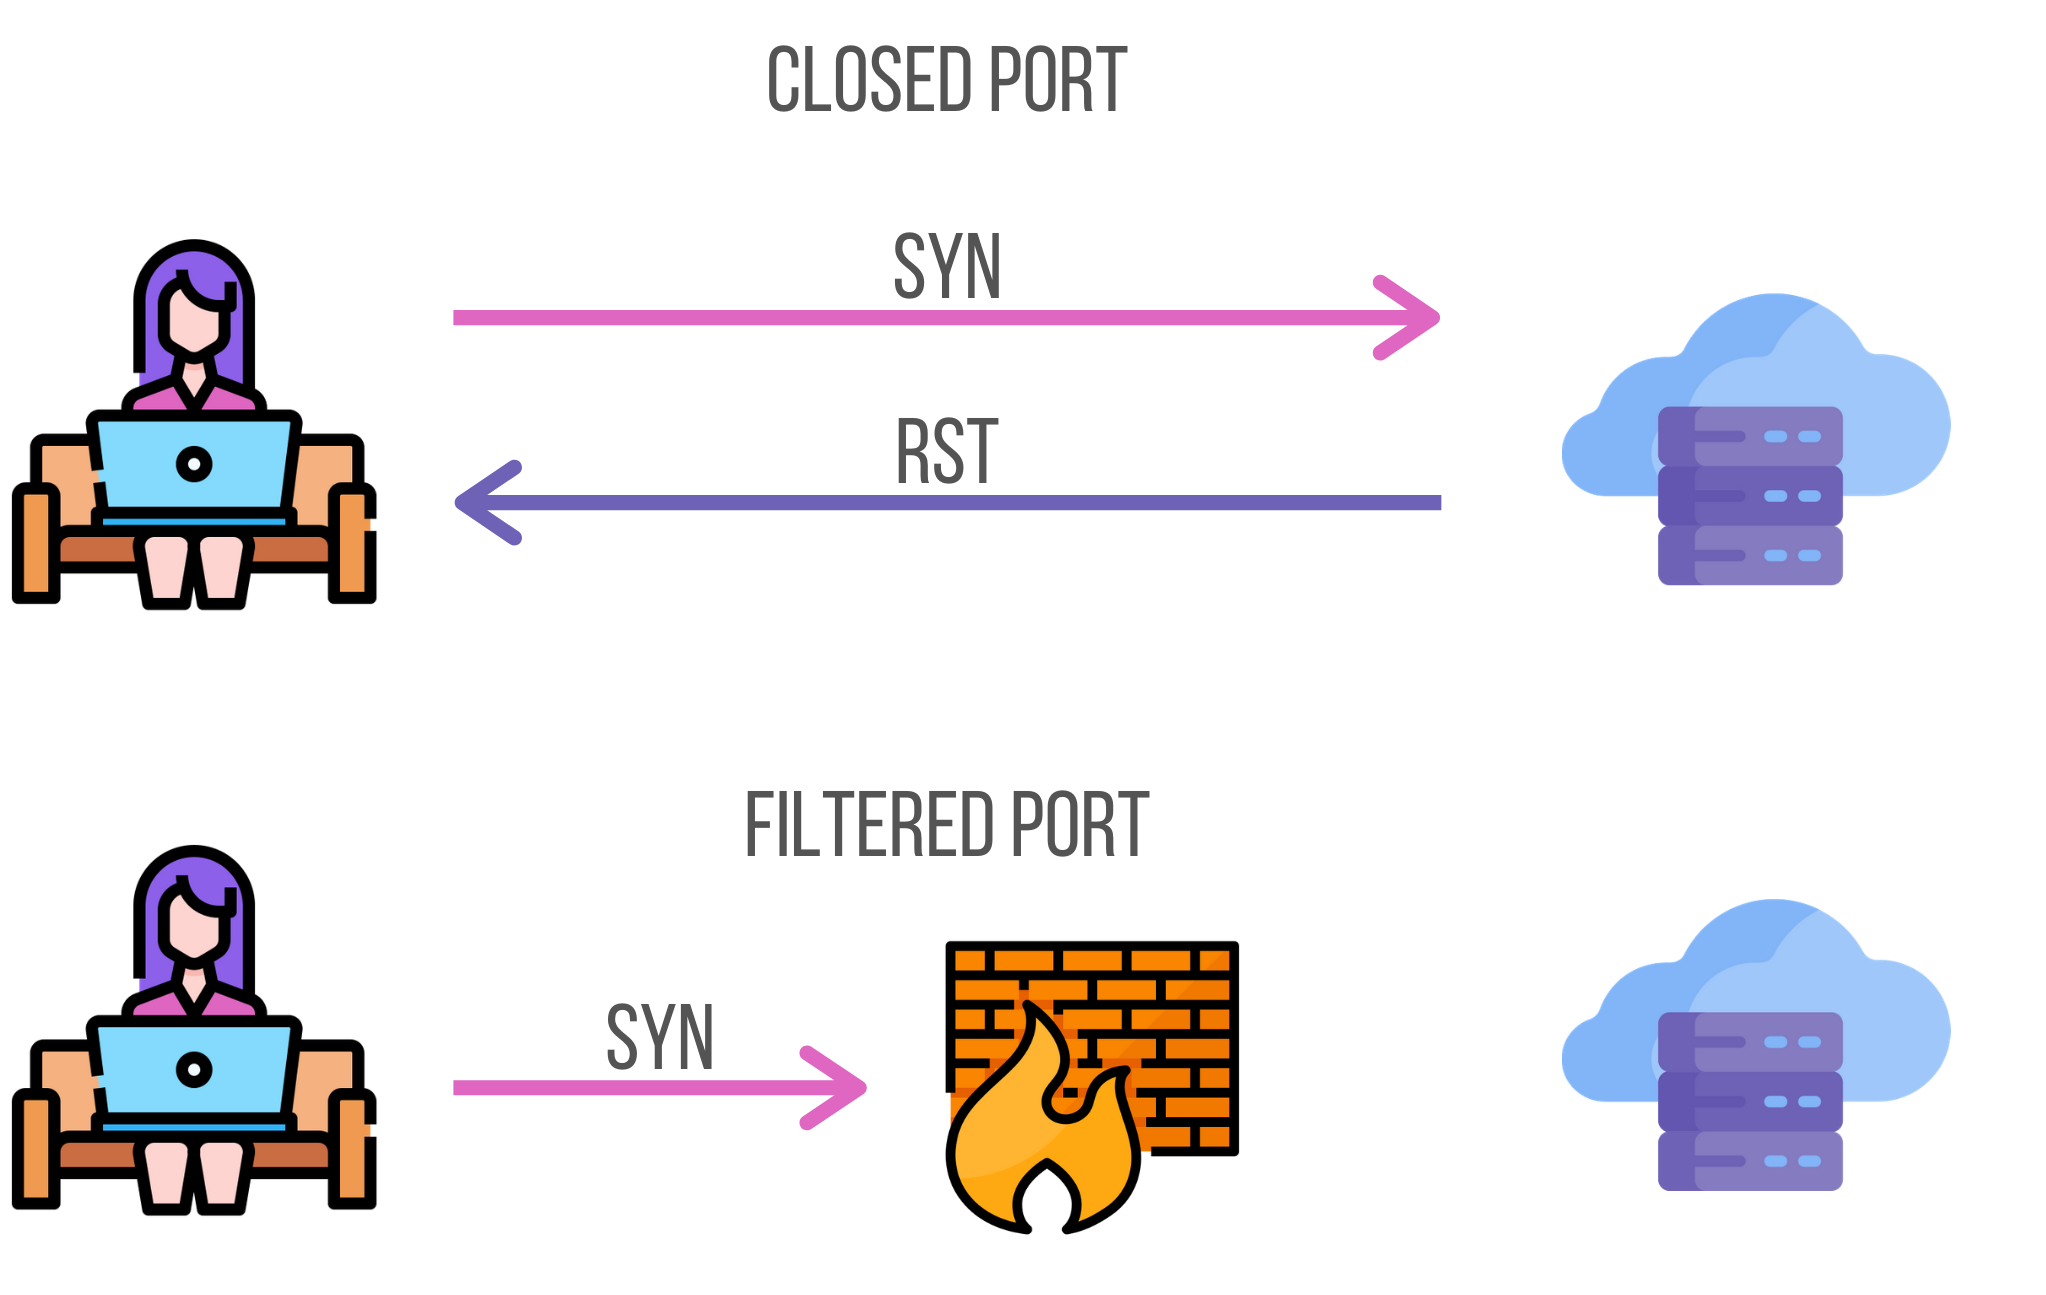 Schema that represents handshake process when port is closed or filtered